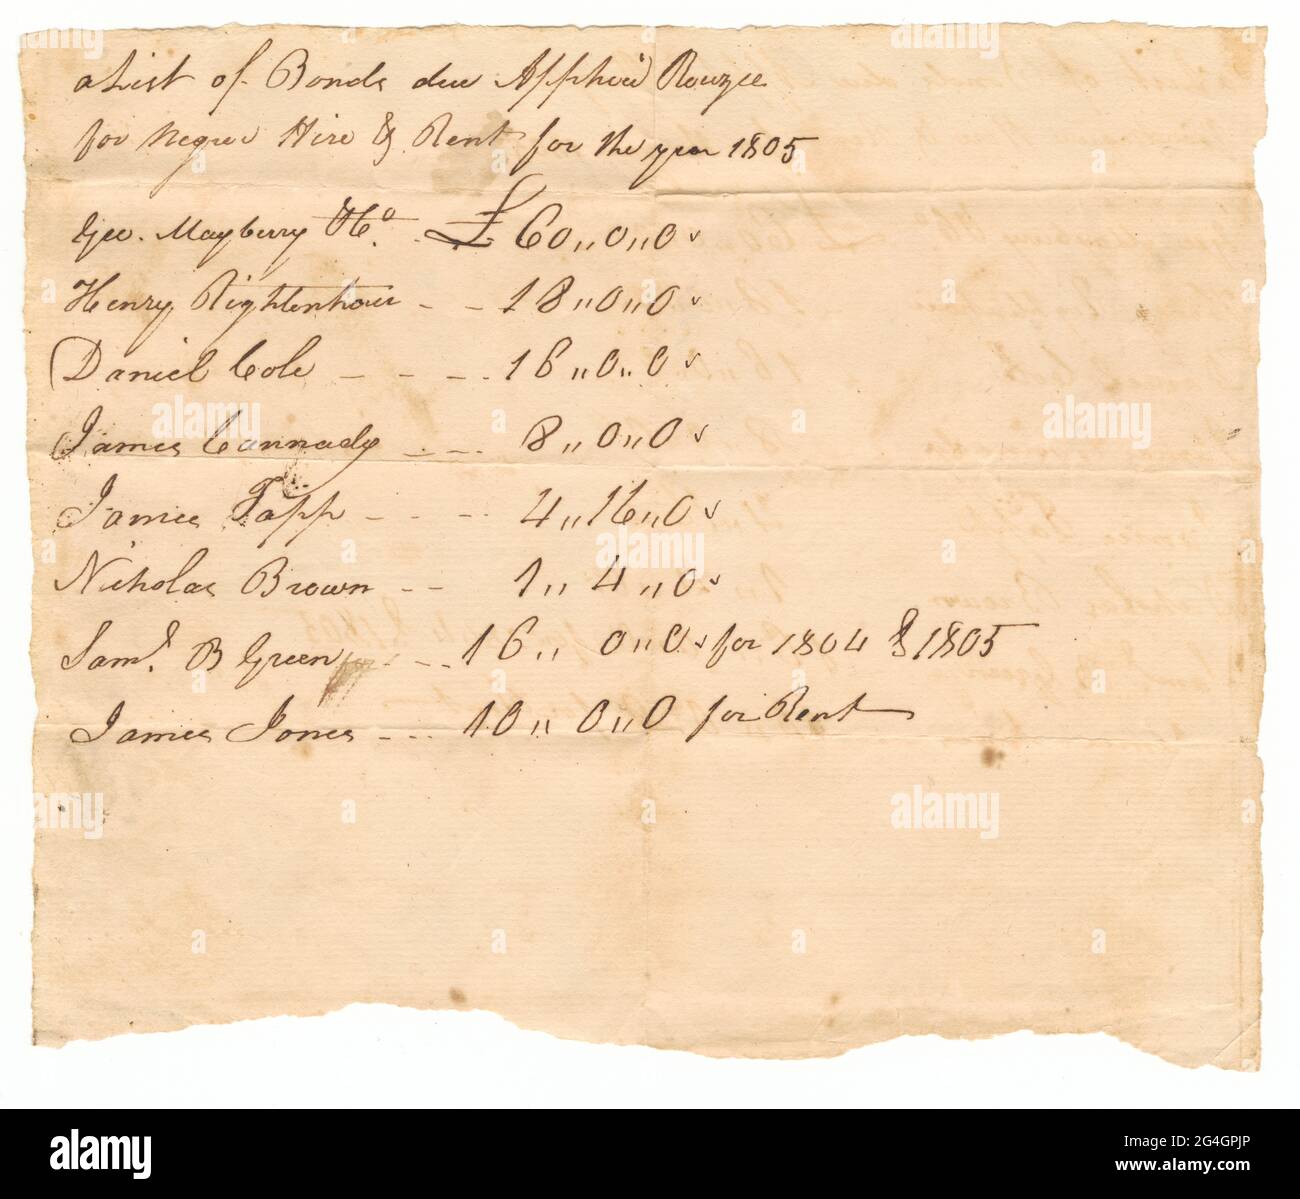 This document is titled at the top &quot;List of Bonds due Apphia Rouzee for Negro Hire &amp; Rent for the year 1805.&quot; The list consists of one column of names and a column of monetary amounts. The document is one page, single-sided, black ink handwritten on paper. This document is from a collection of financial papers related to the plantation operations of several generations of the Rouzee Family in Essex County, Virginia. The papers date from the 1790s through 1860. Stock Photo